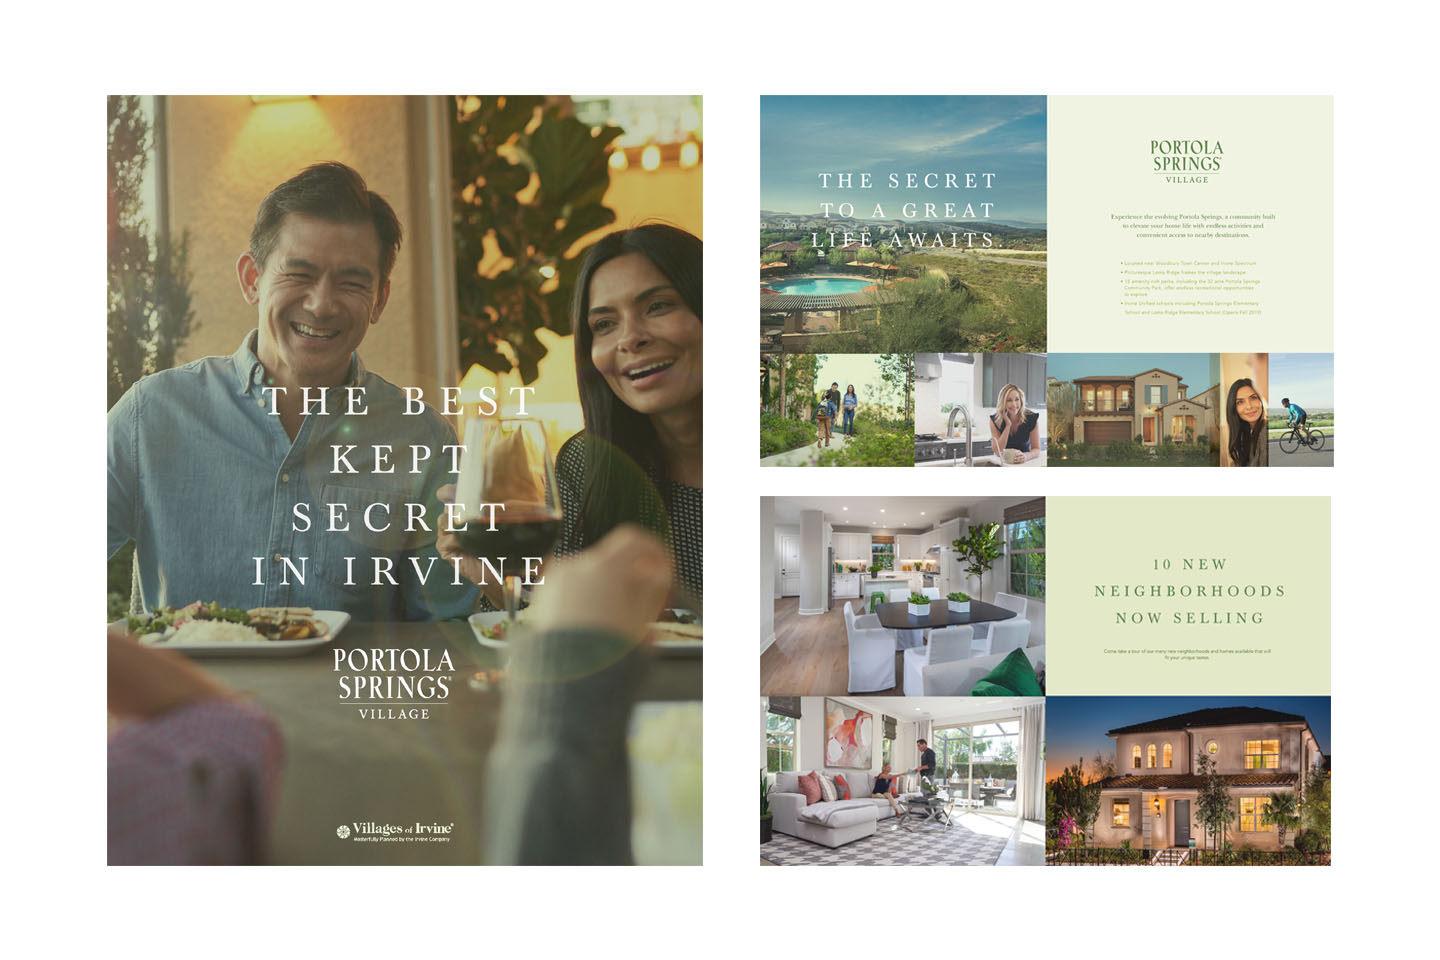 Residential community marketing launch campaign